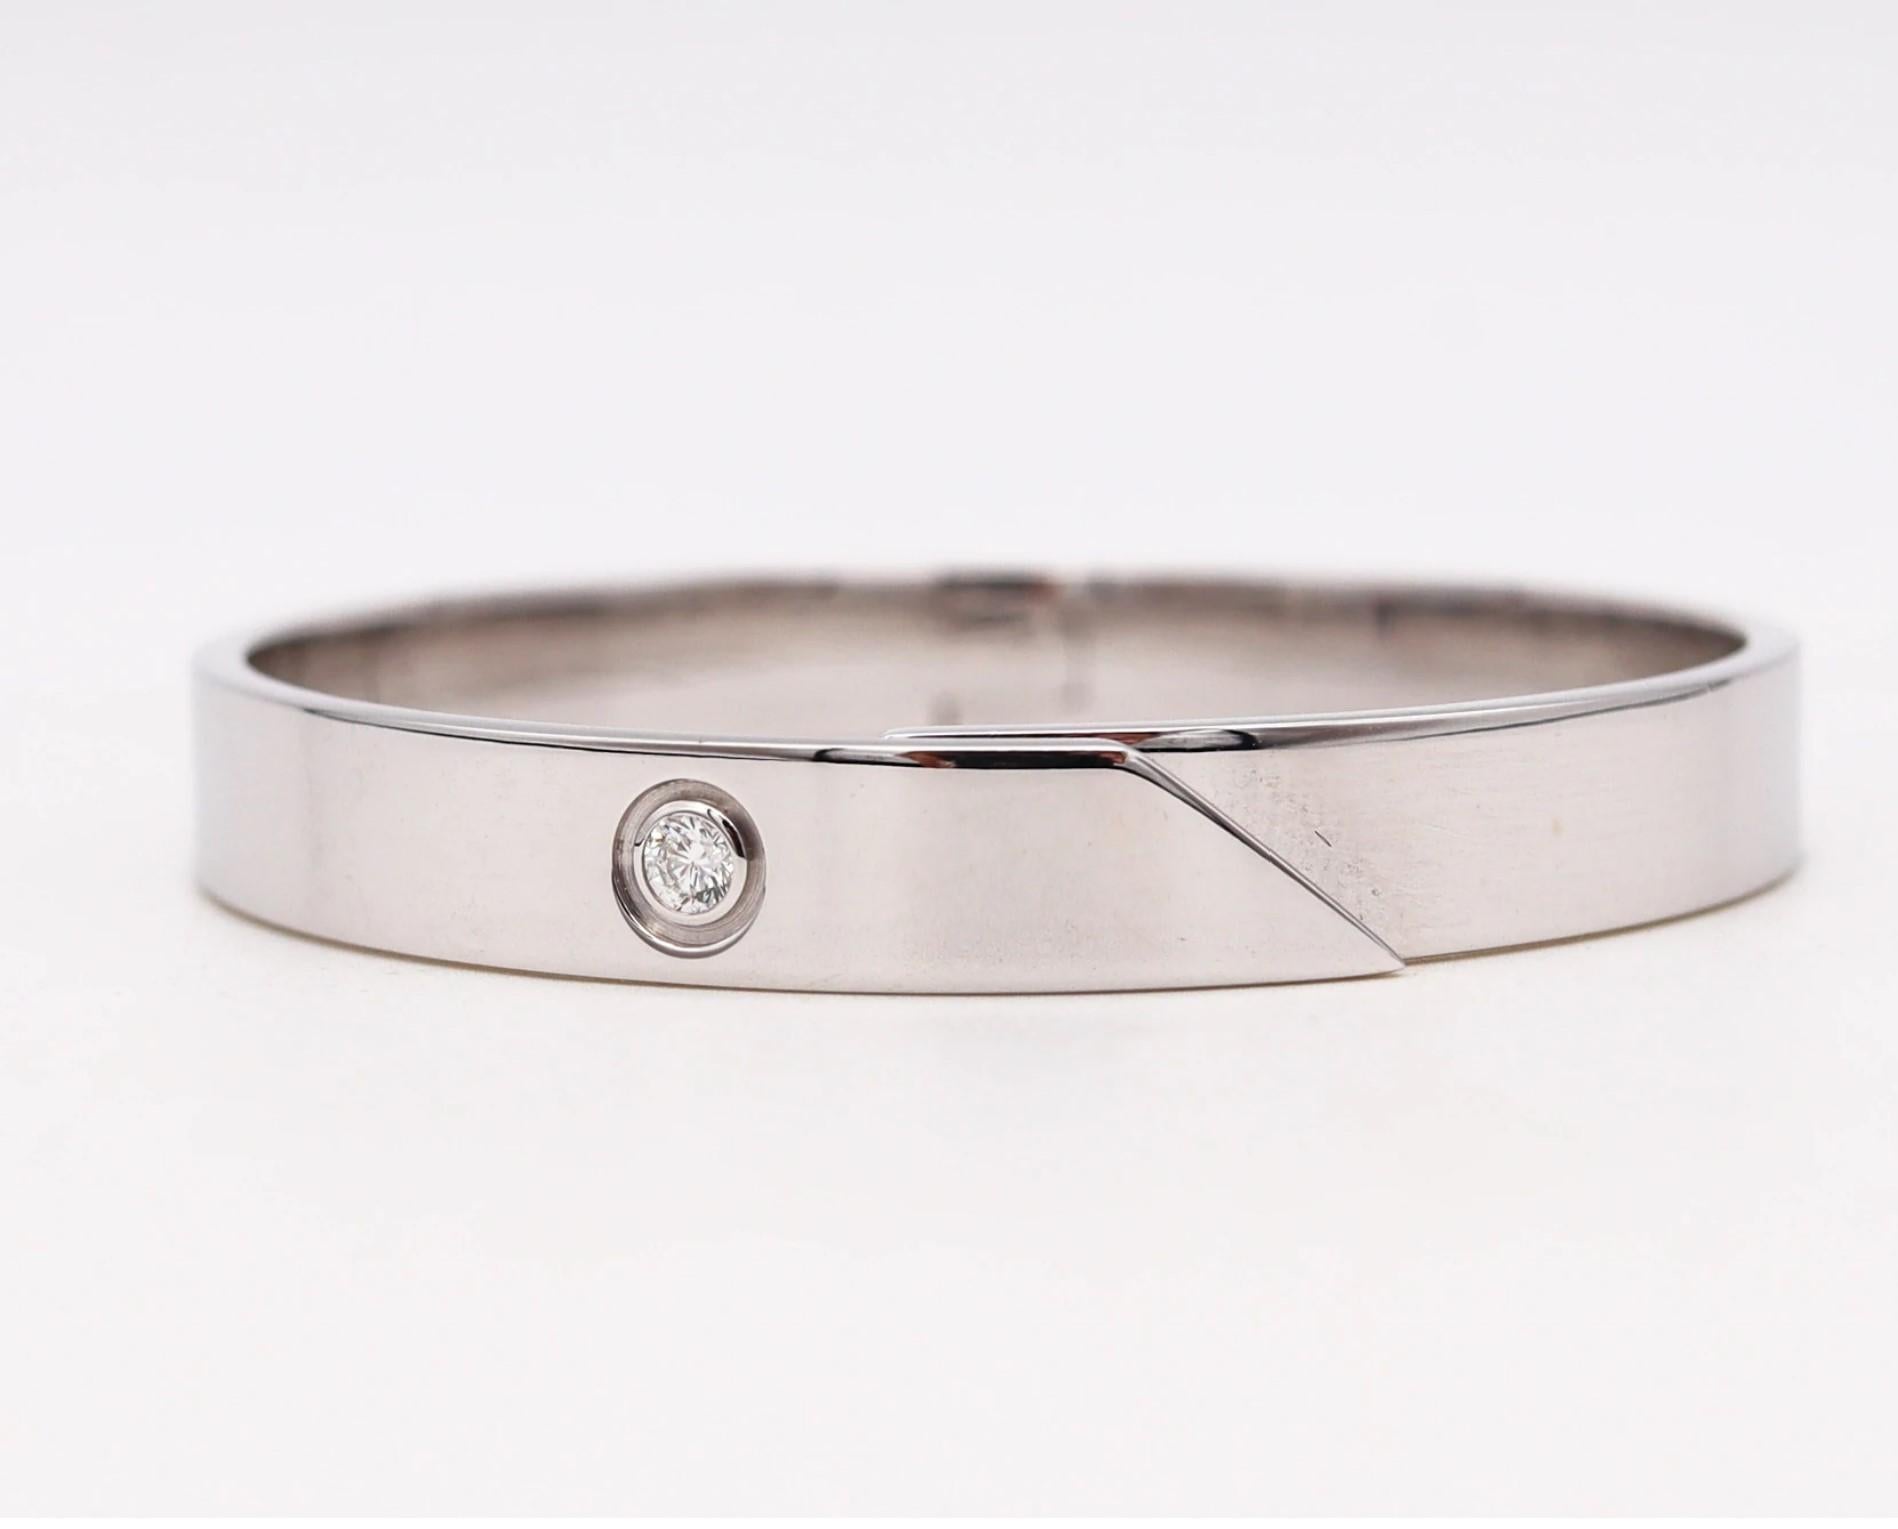 Beautiful anniversary bangle designed by Cartier.

An iconic anniversary bangle bracelet, created in Paris France by the house of Cartier, back in the 2001. This piece has been crafted in solid white gold of 18 karats with very high polished finish.